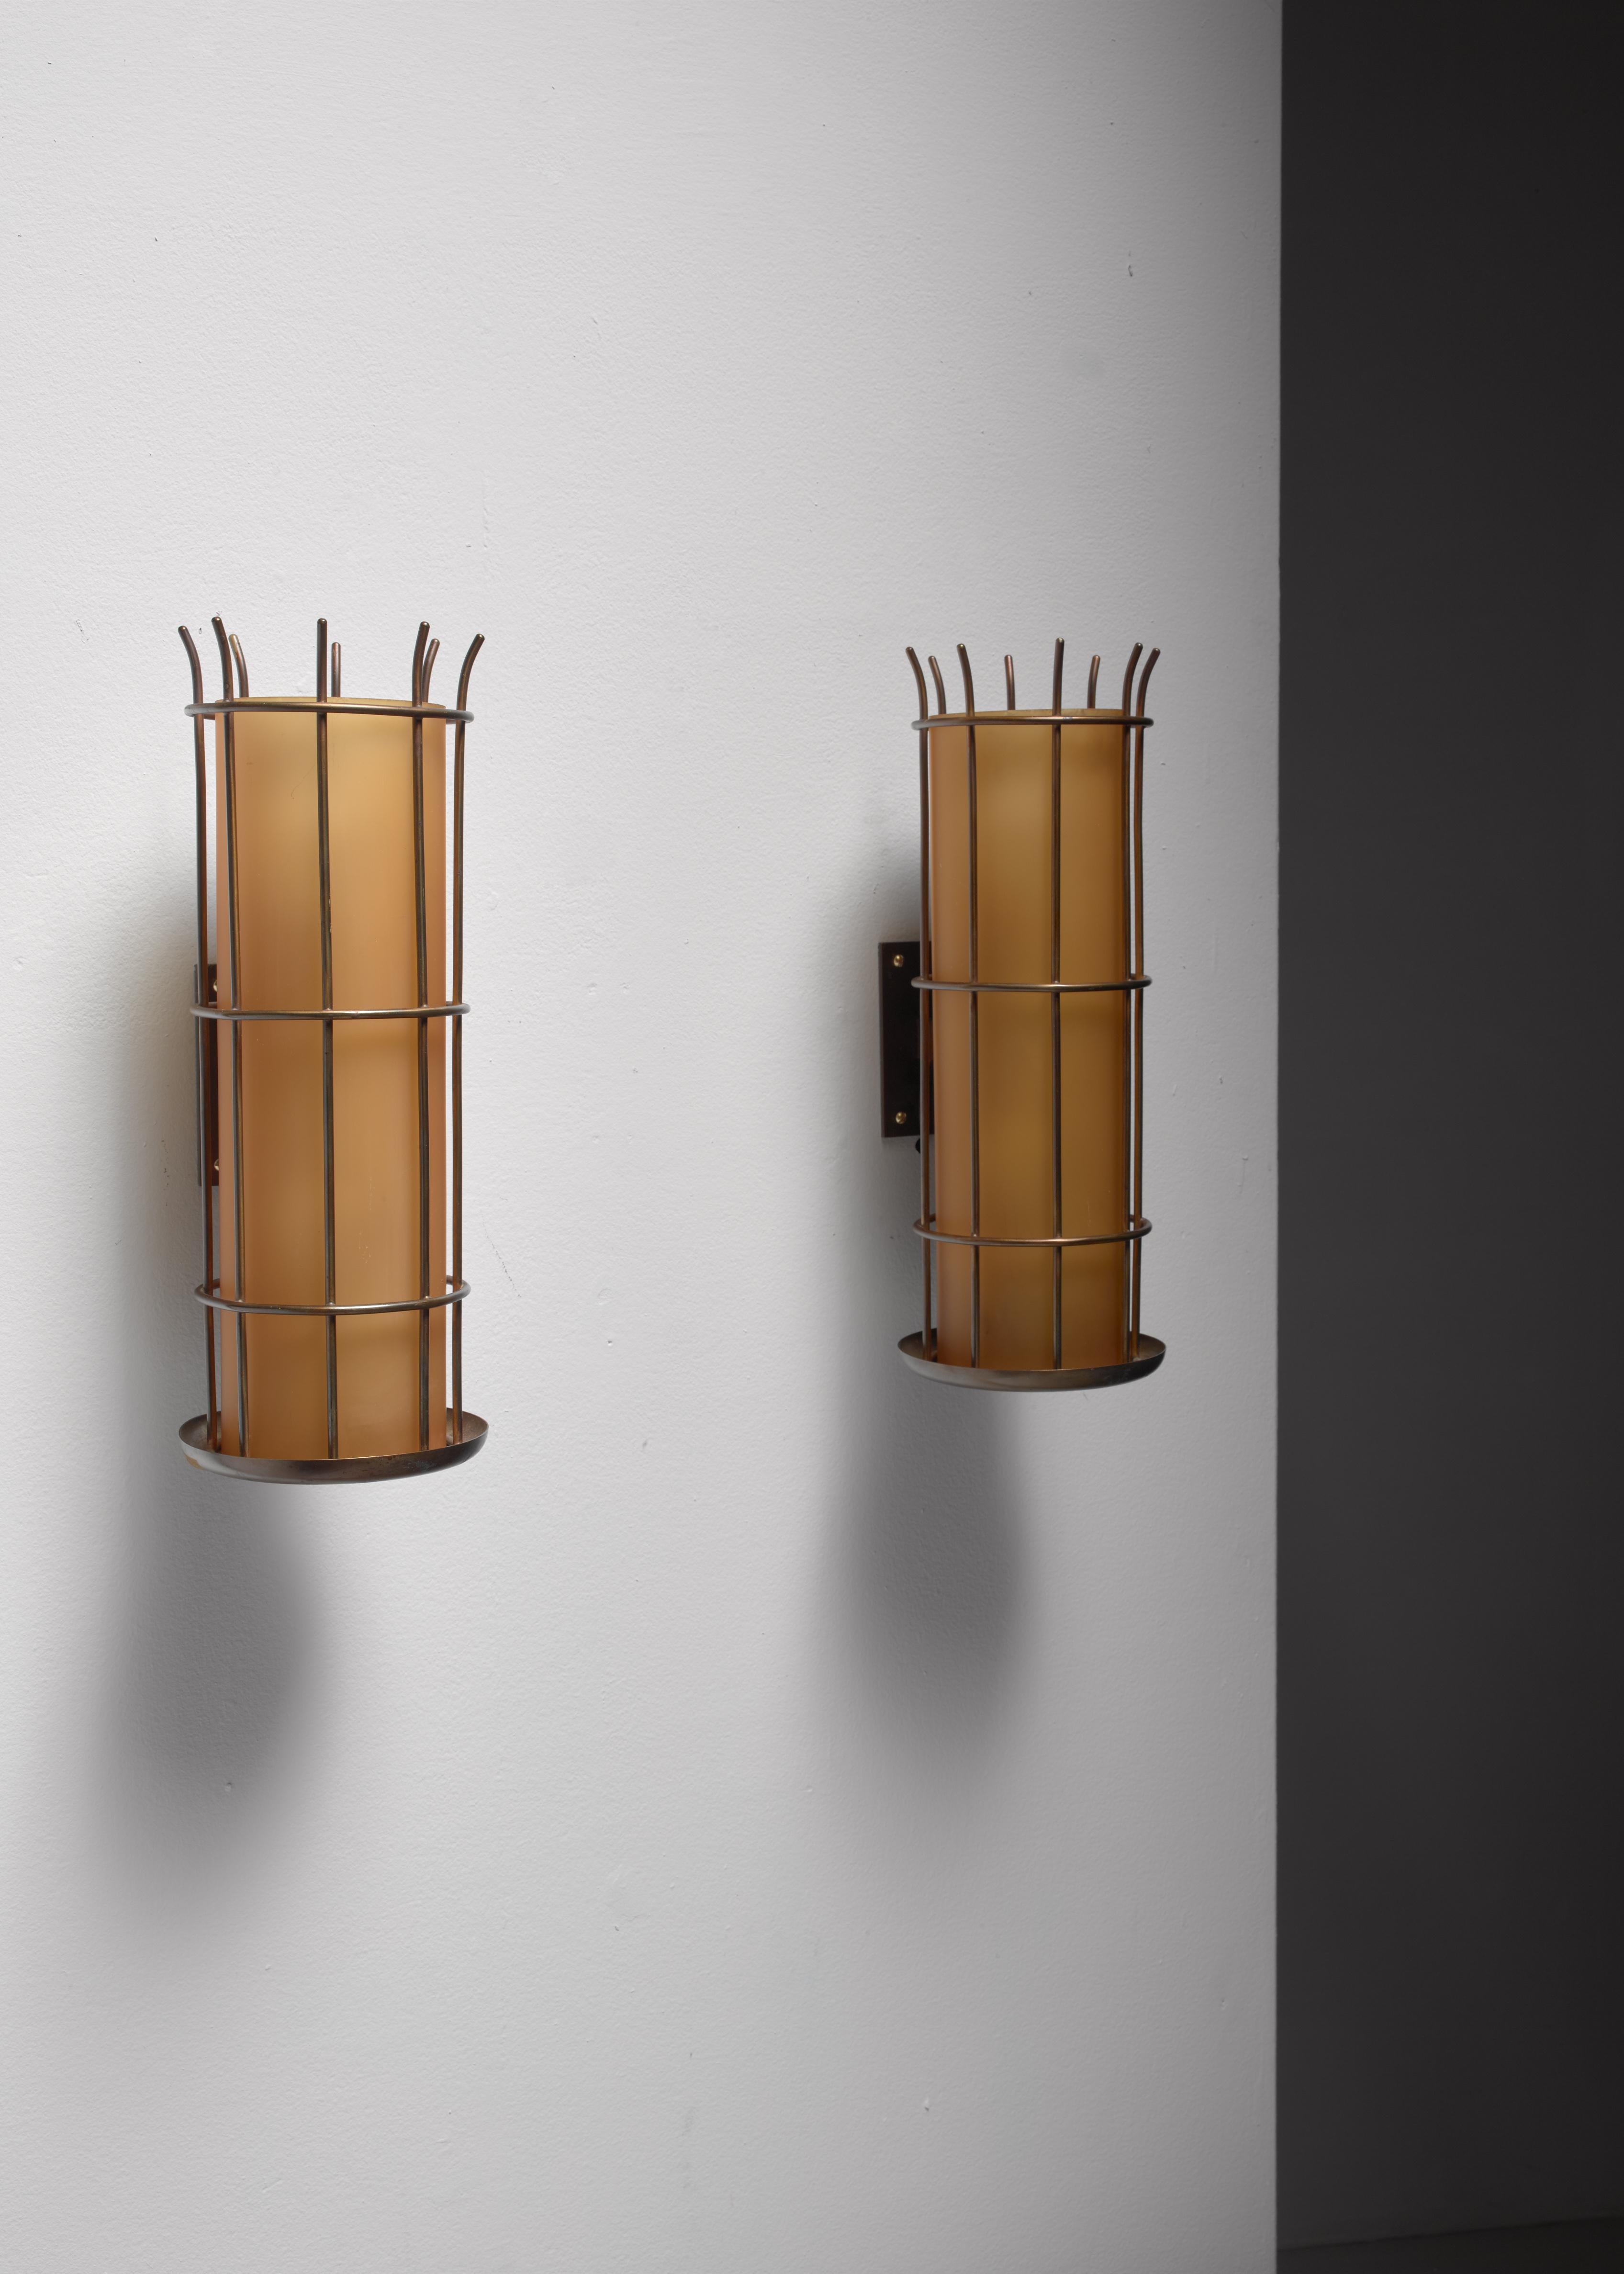 A pair of Art Deco wall lamps, made of yellow glass diffusers in a round brass frame.